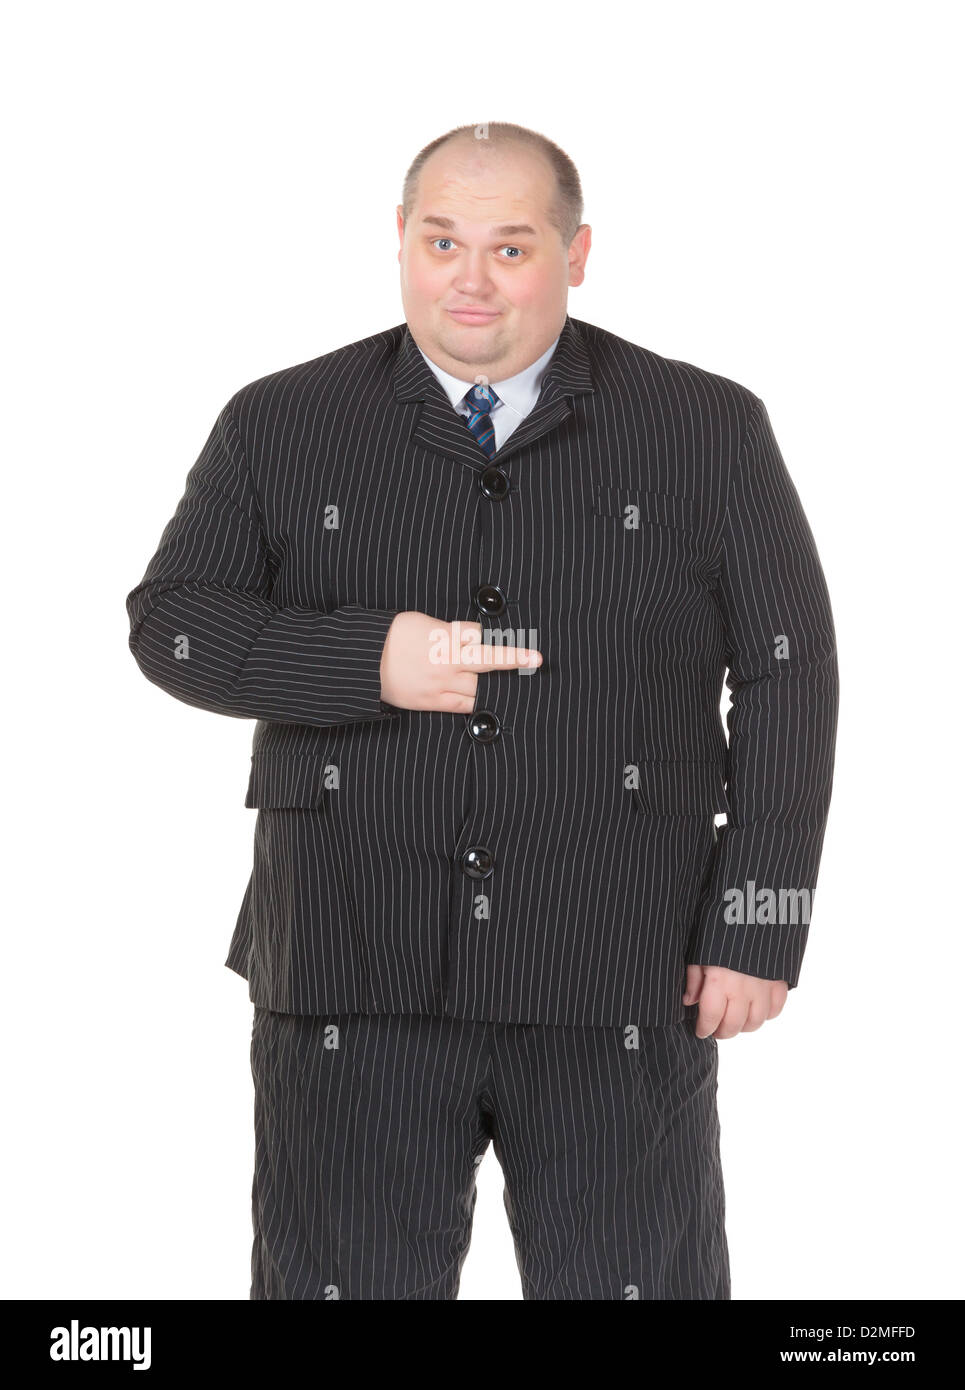 Obese businessman in a suit and tie making gesturing, isolated on white Stock Photo